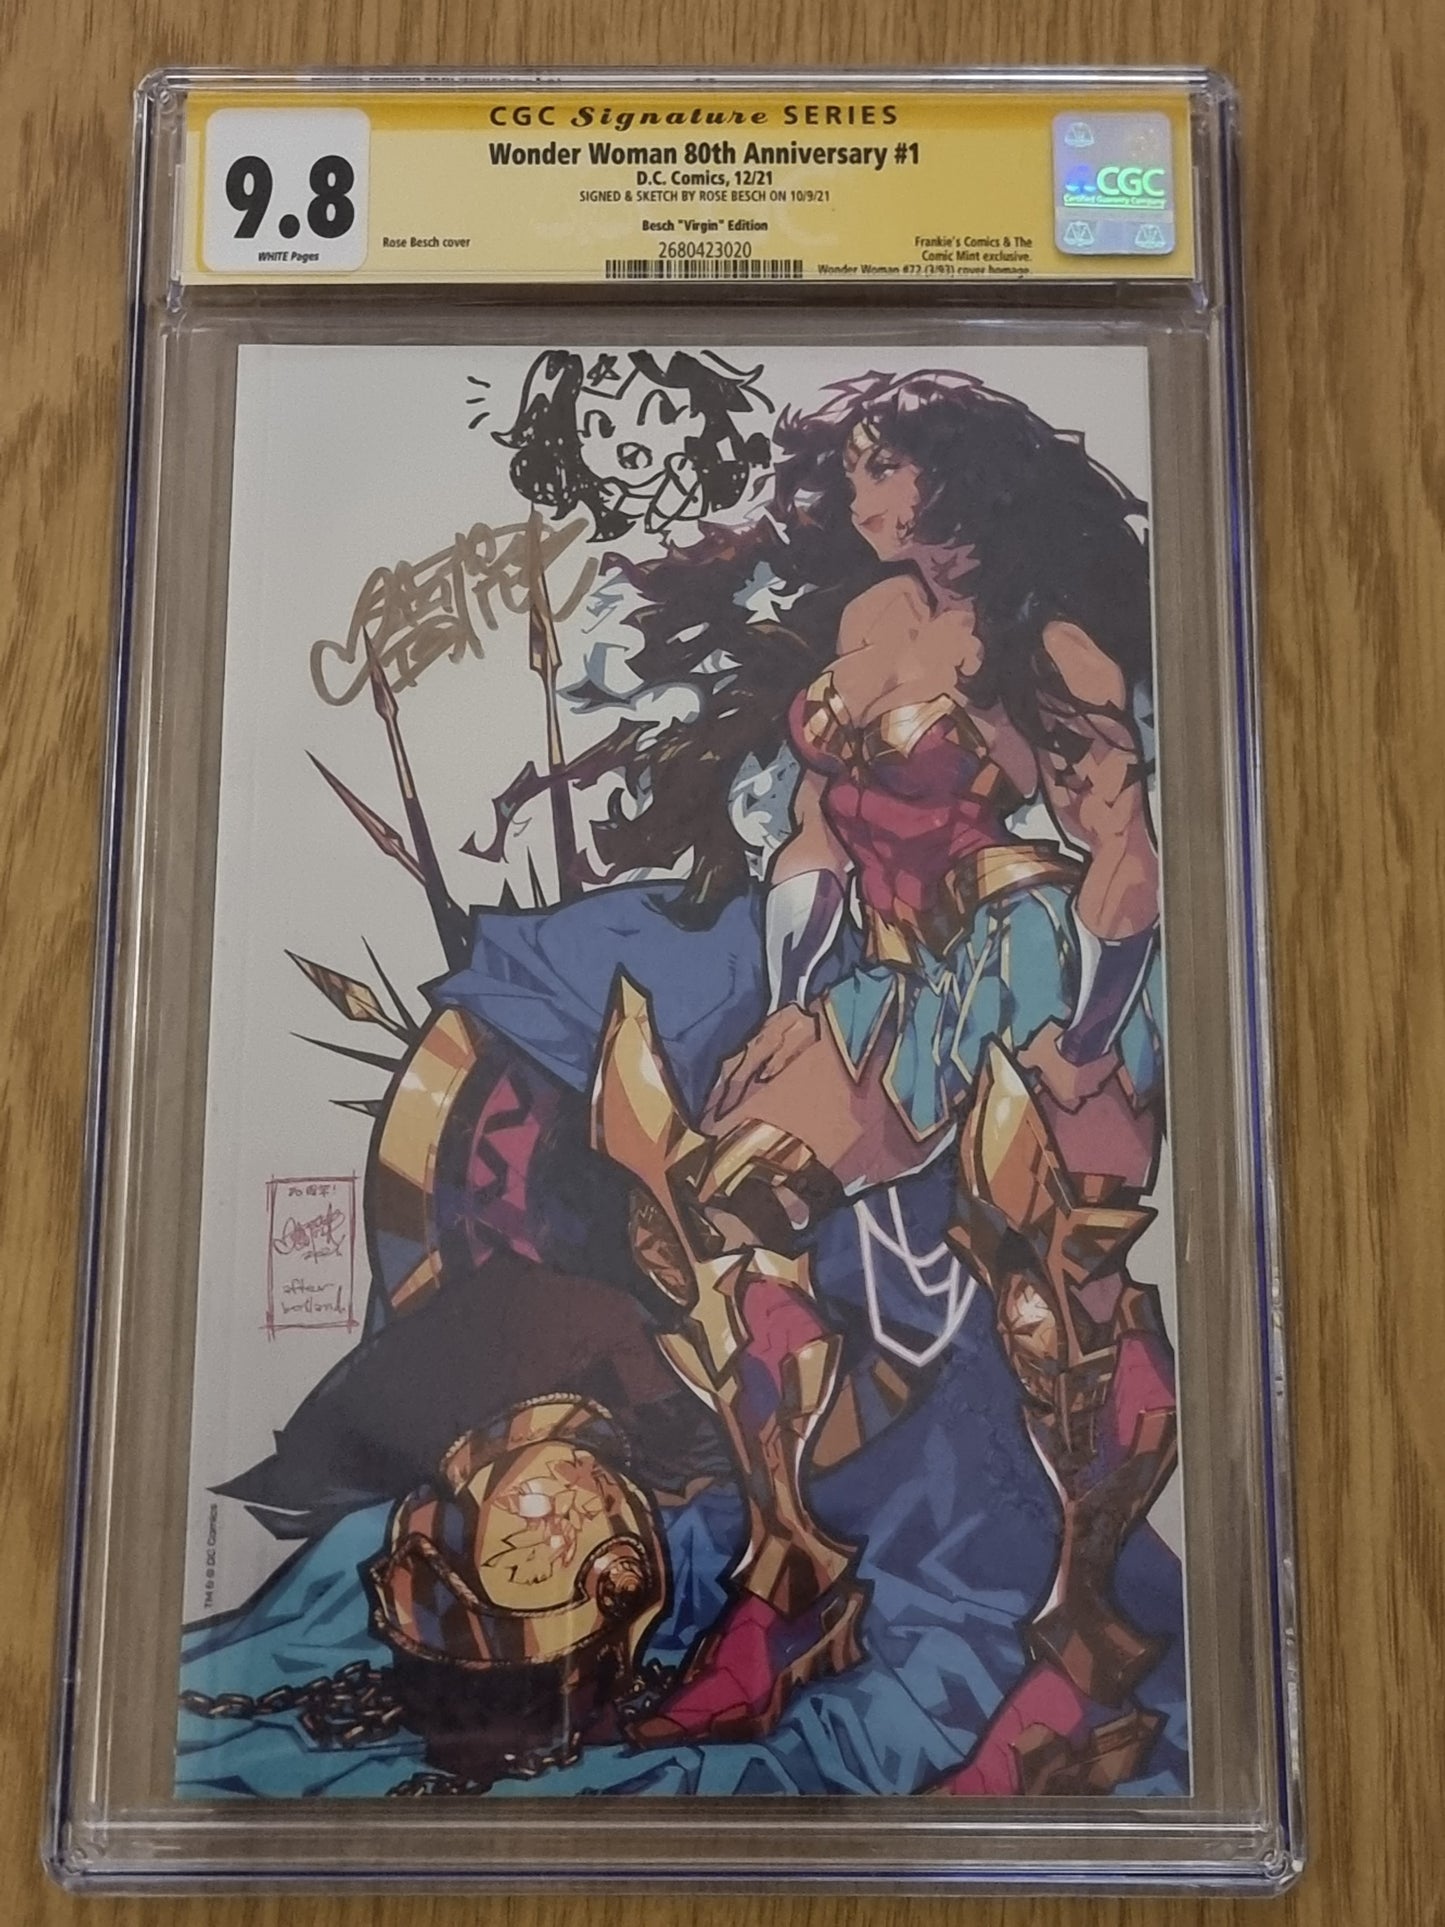 WONDER WOMAN 80TH ANNIVERSARY ROSE BESCH NYCC VIRGIN VARIANT LIMITED TO 1000 WITH COA CGC 9.8 REMARK